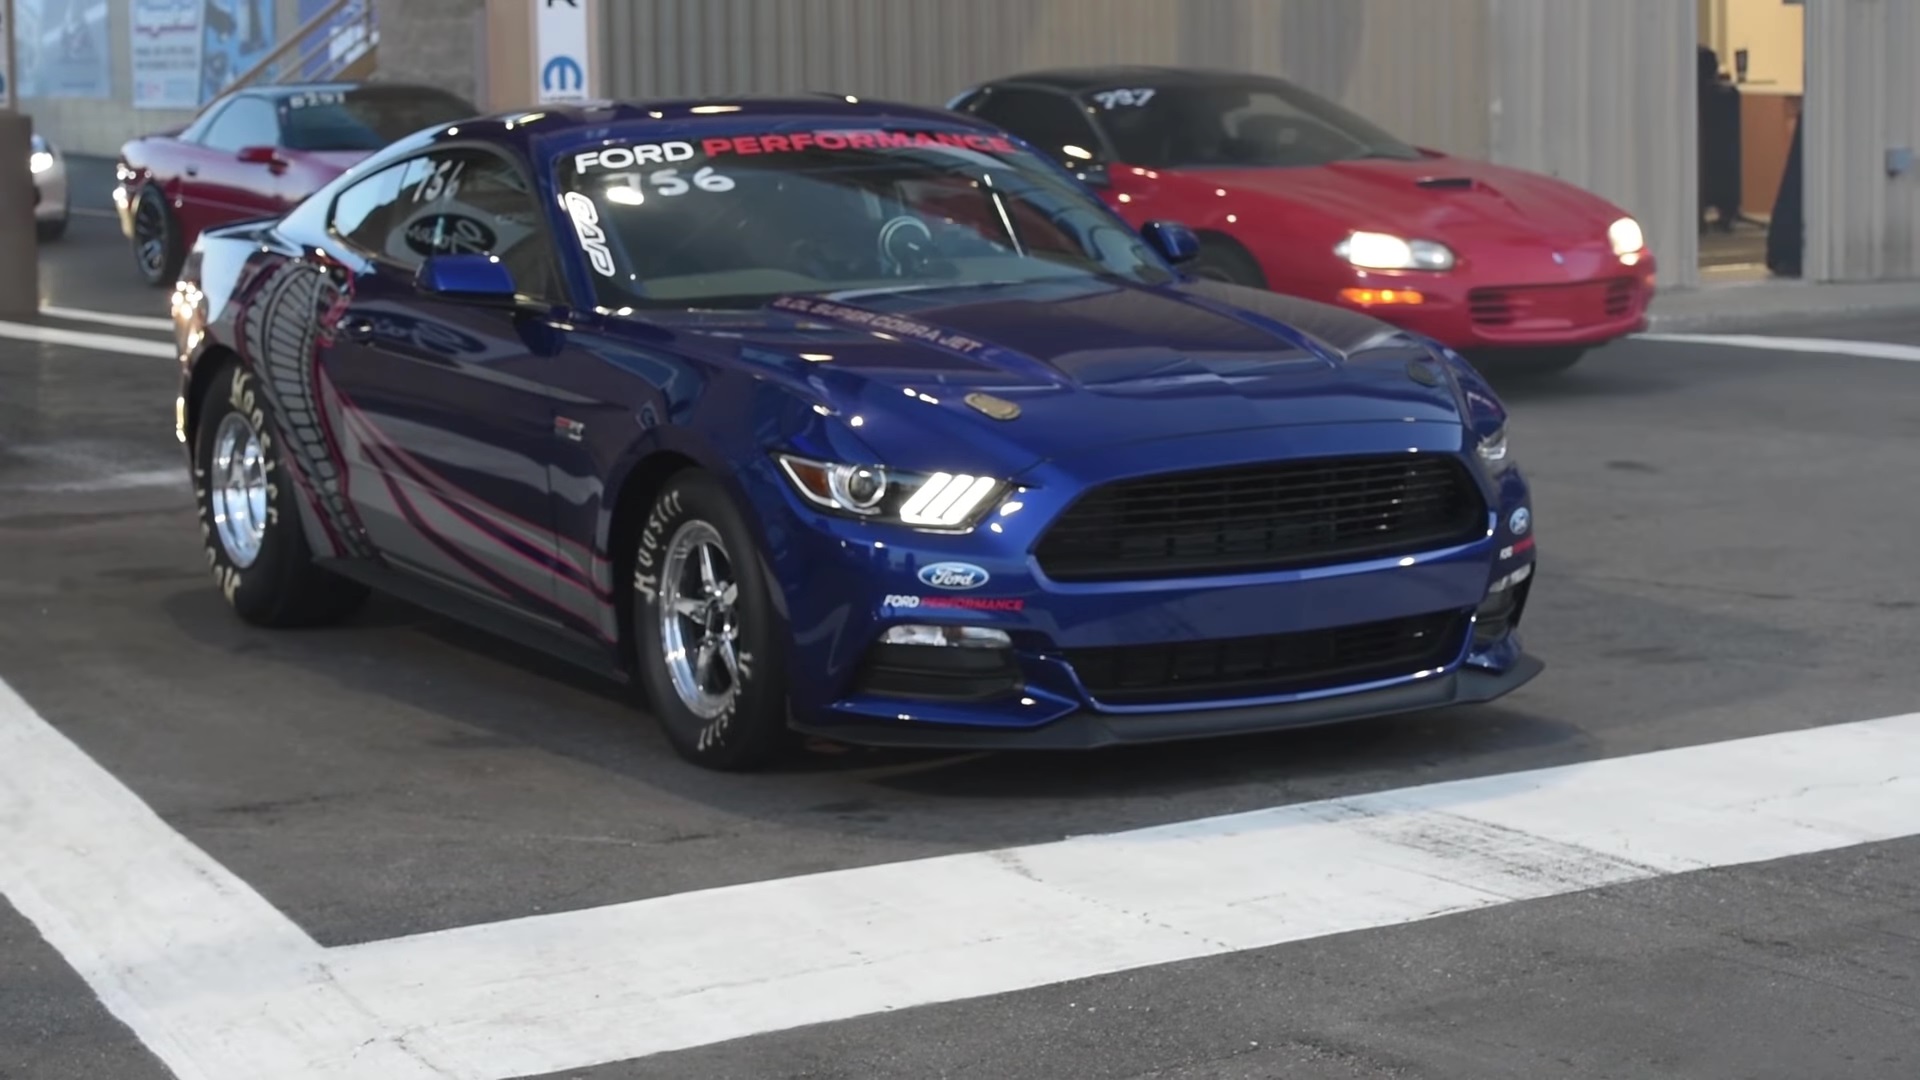 Video: 2016 Ford Mustang Cobra Jet Making Its First Passes